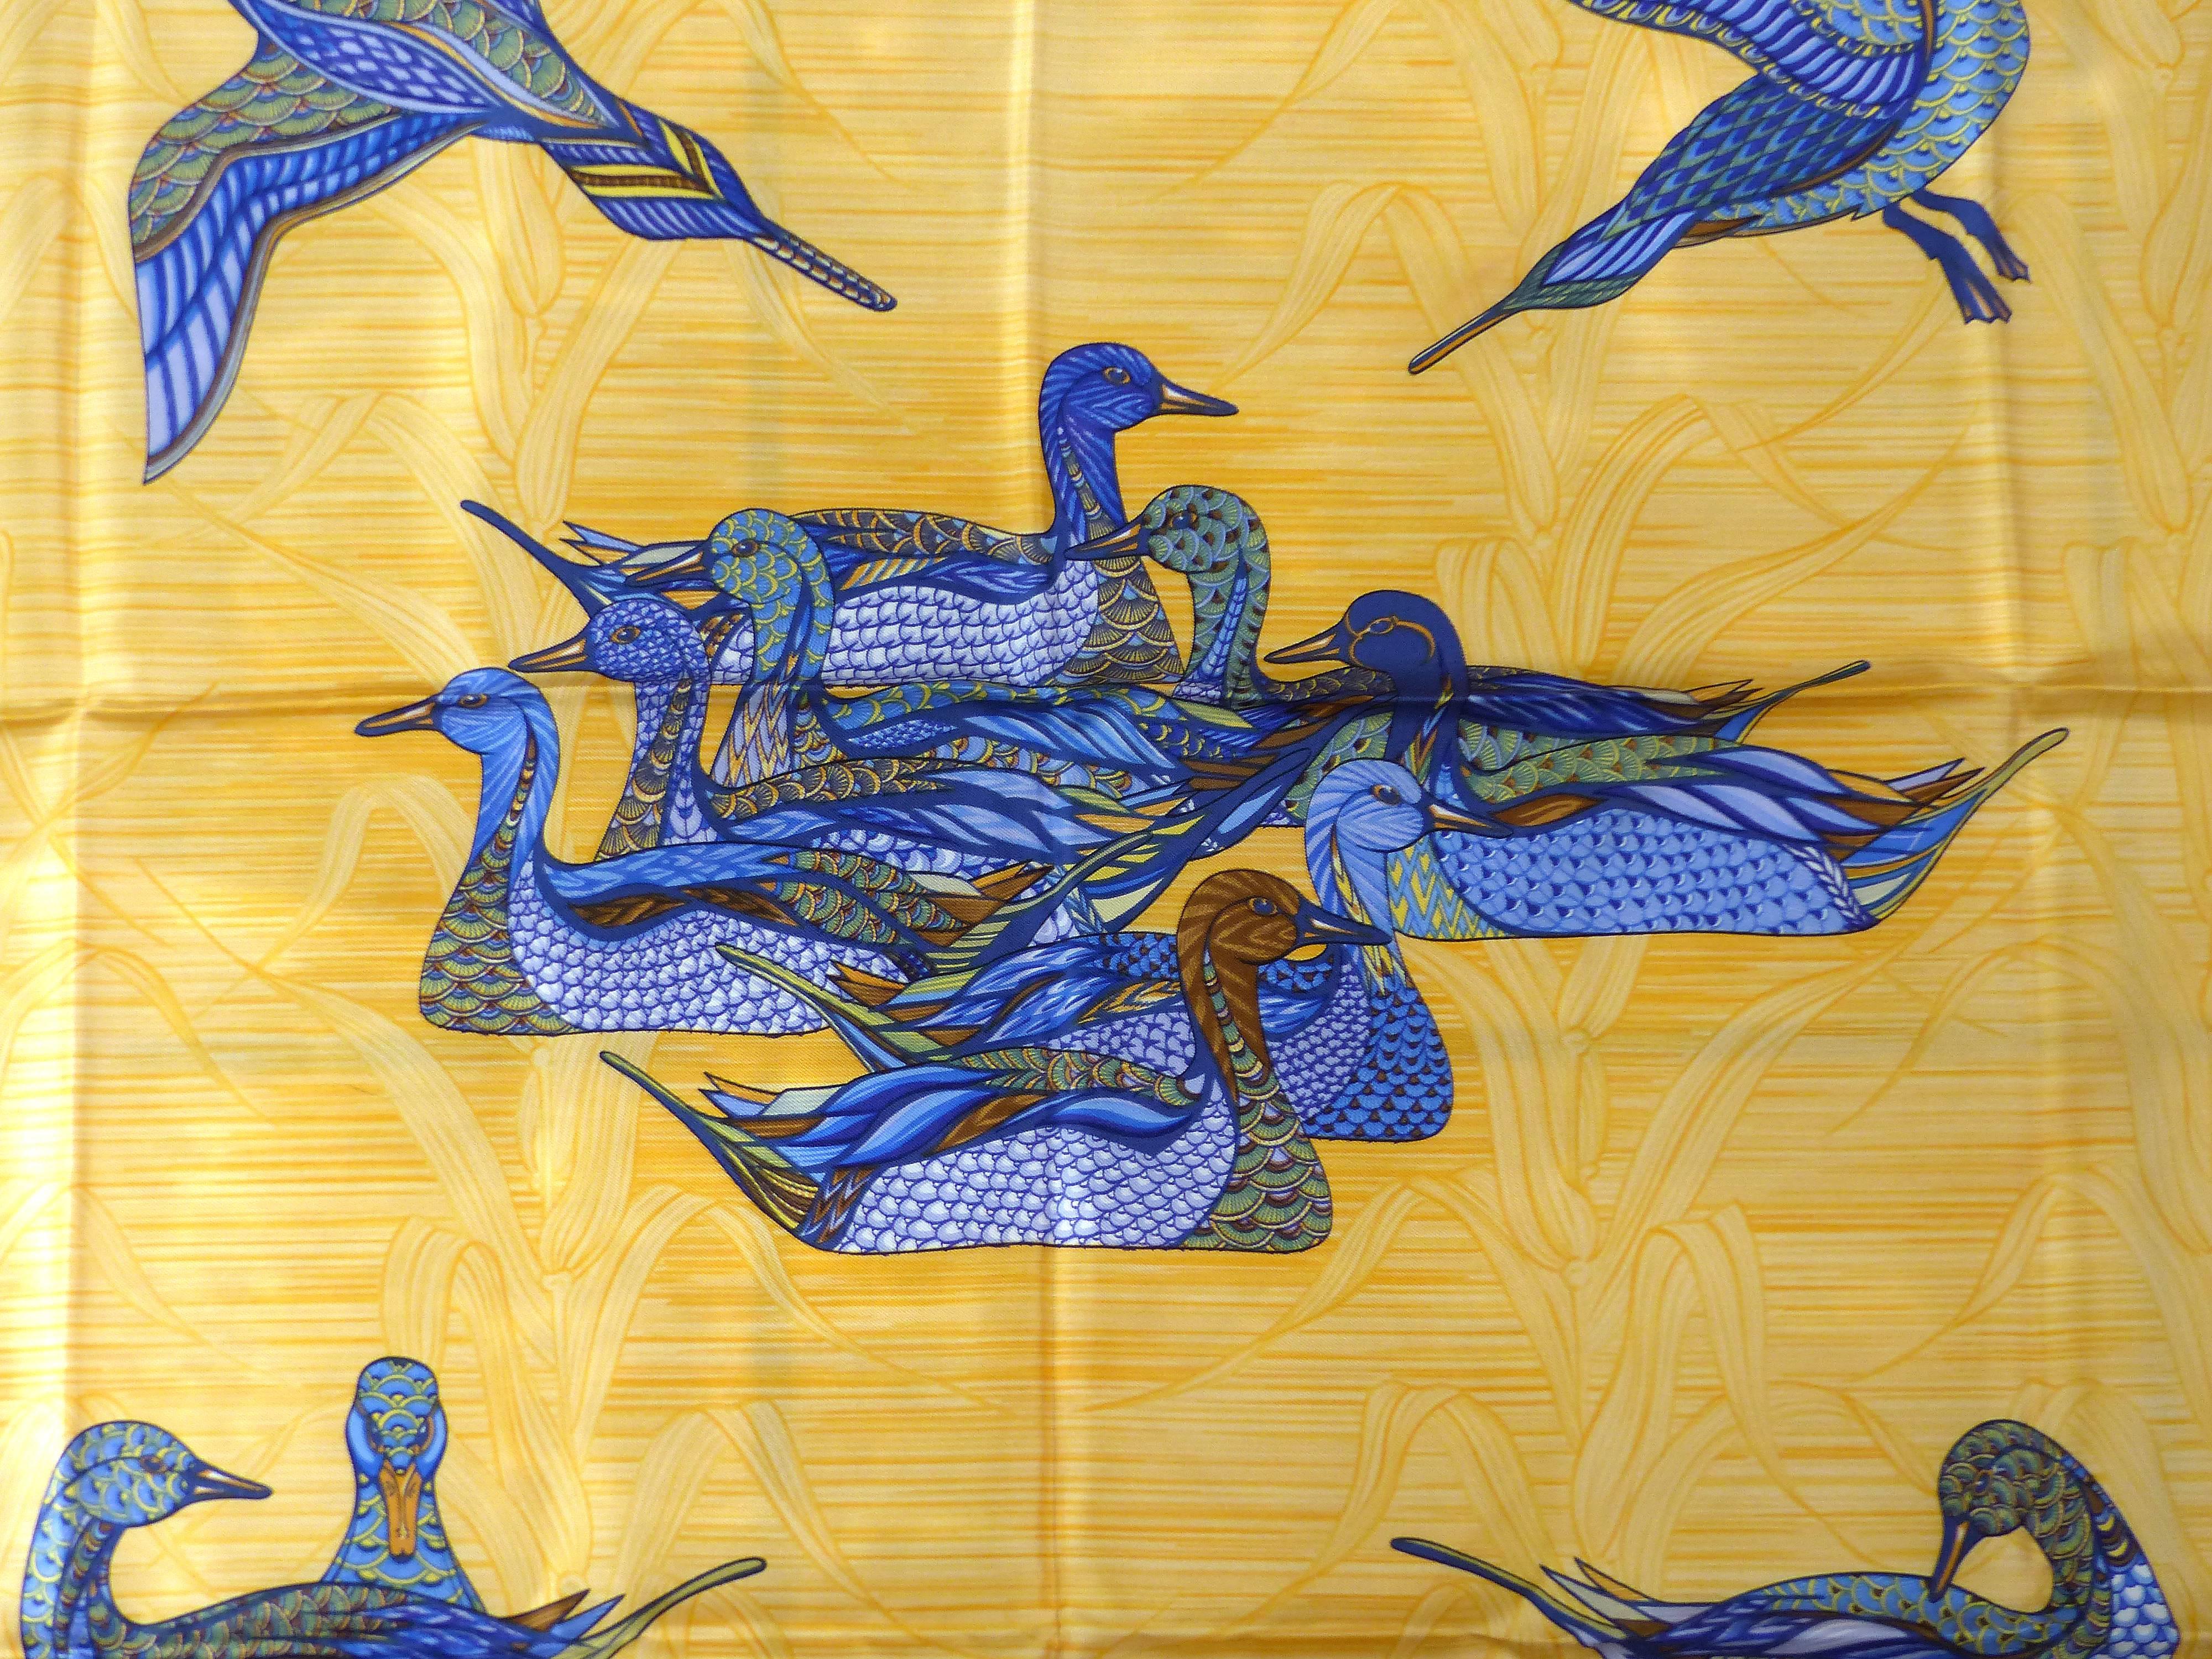 Offered for sale is an Hermes silk scarf titled "La Mare aux Canards" by Daphne Duchesne in 1981. This scarf depicts ducks gliding across waters. The scarf was acquired from a collector and still retains the original folds.